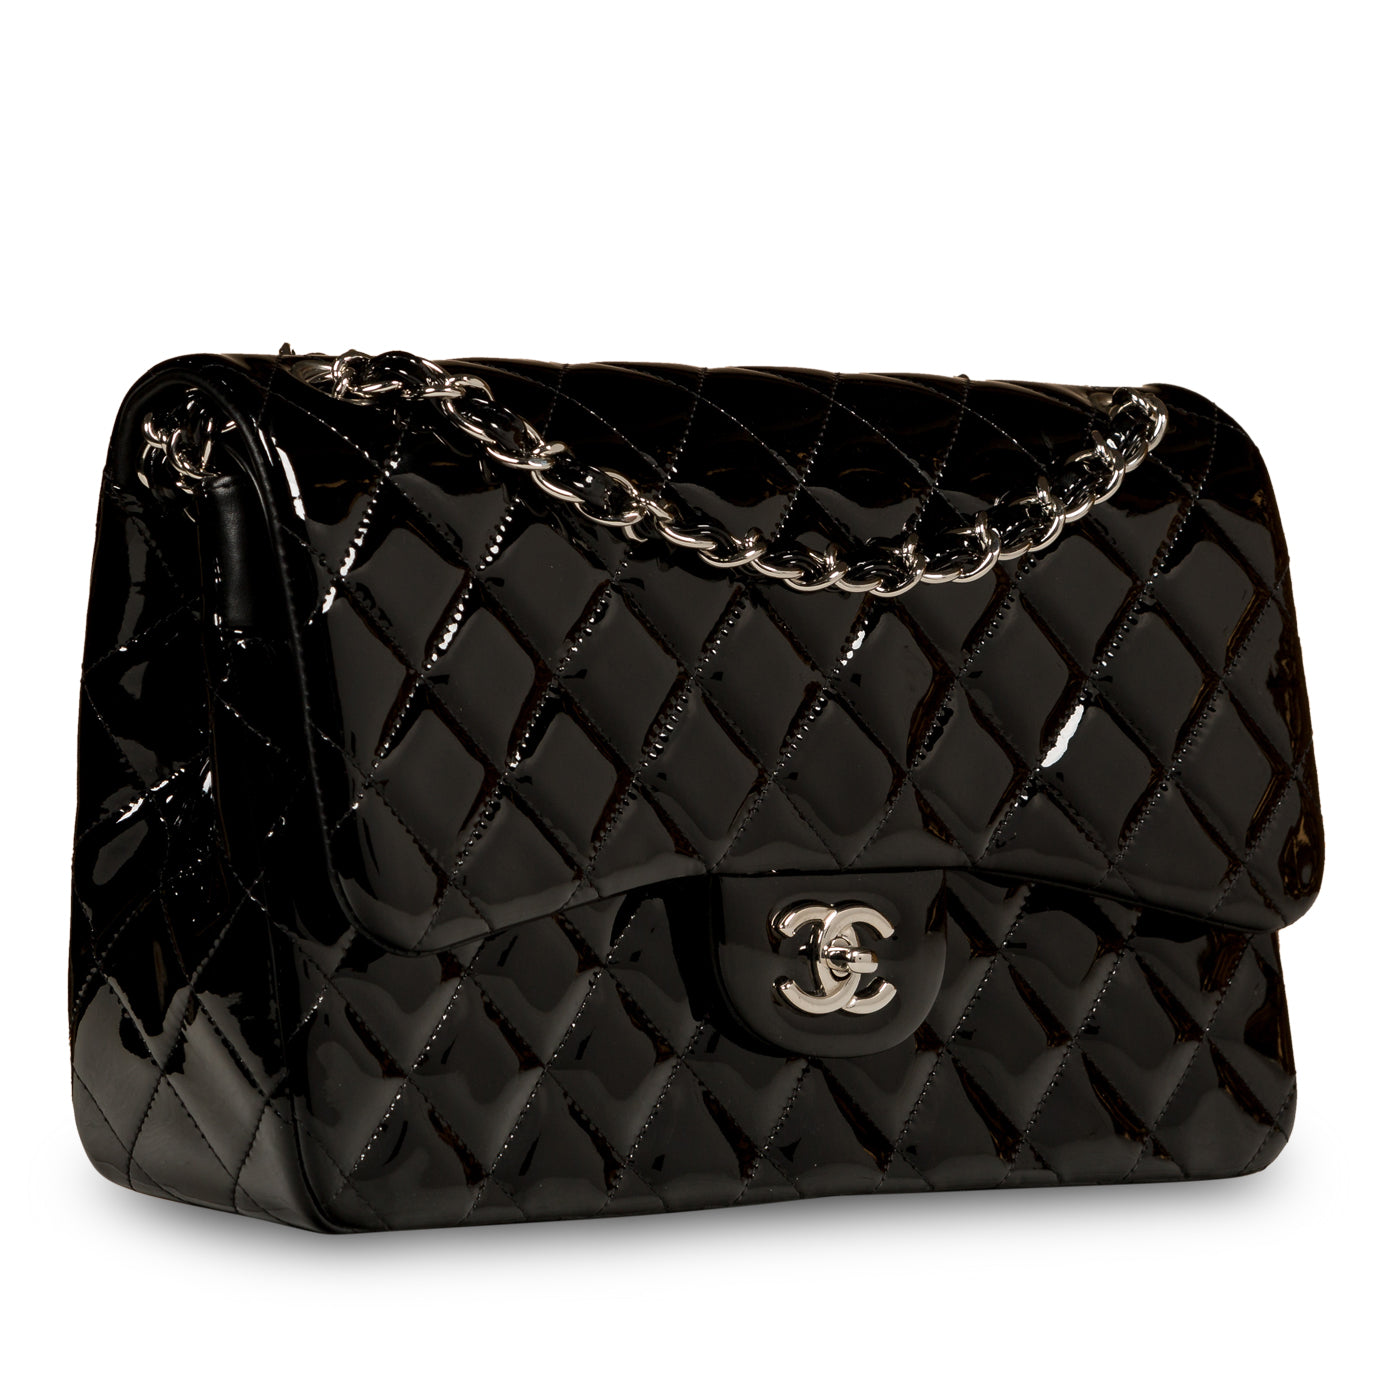 Chanel Patent Leather Classic Maxi Double Flap Bag, Chanel Handbags